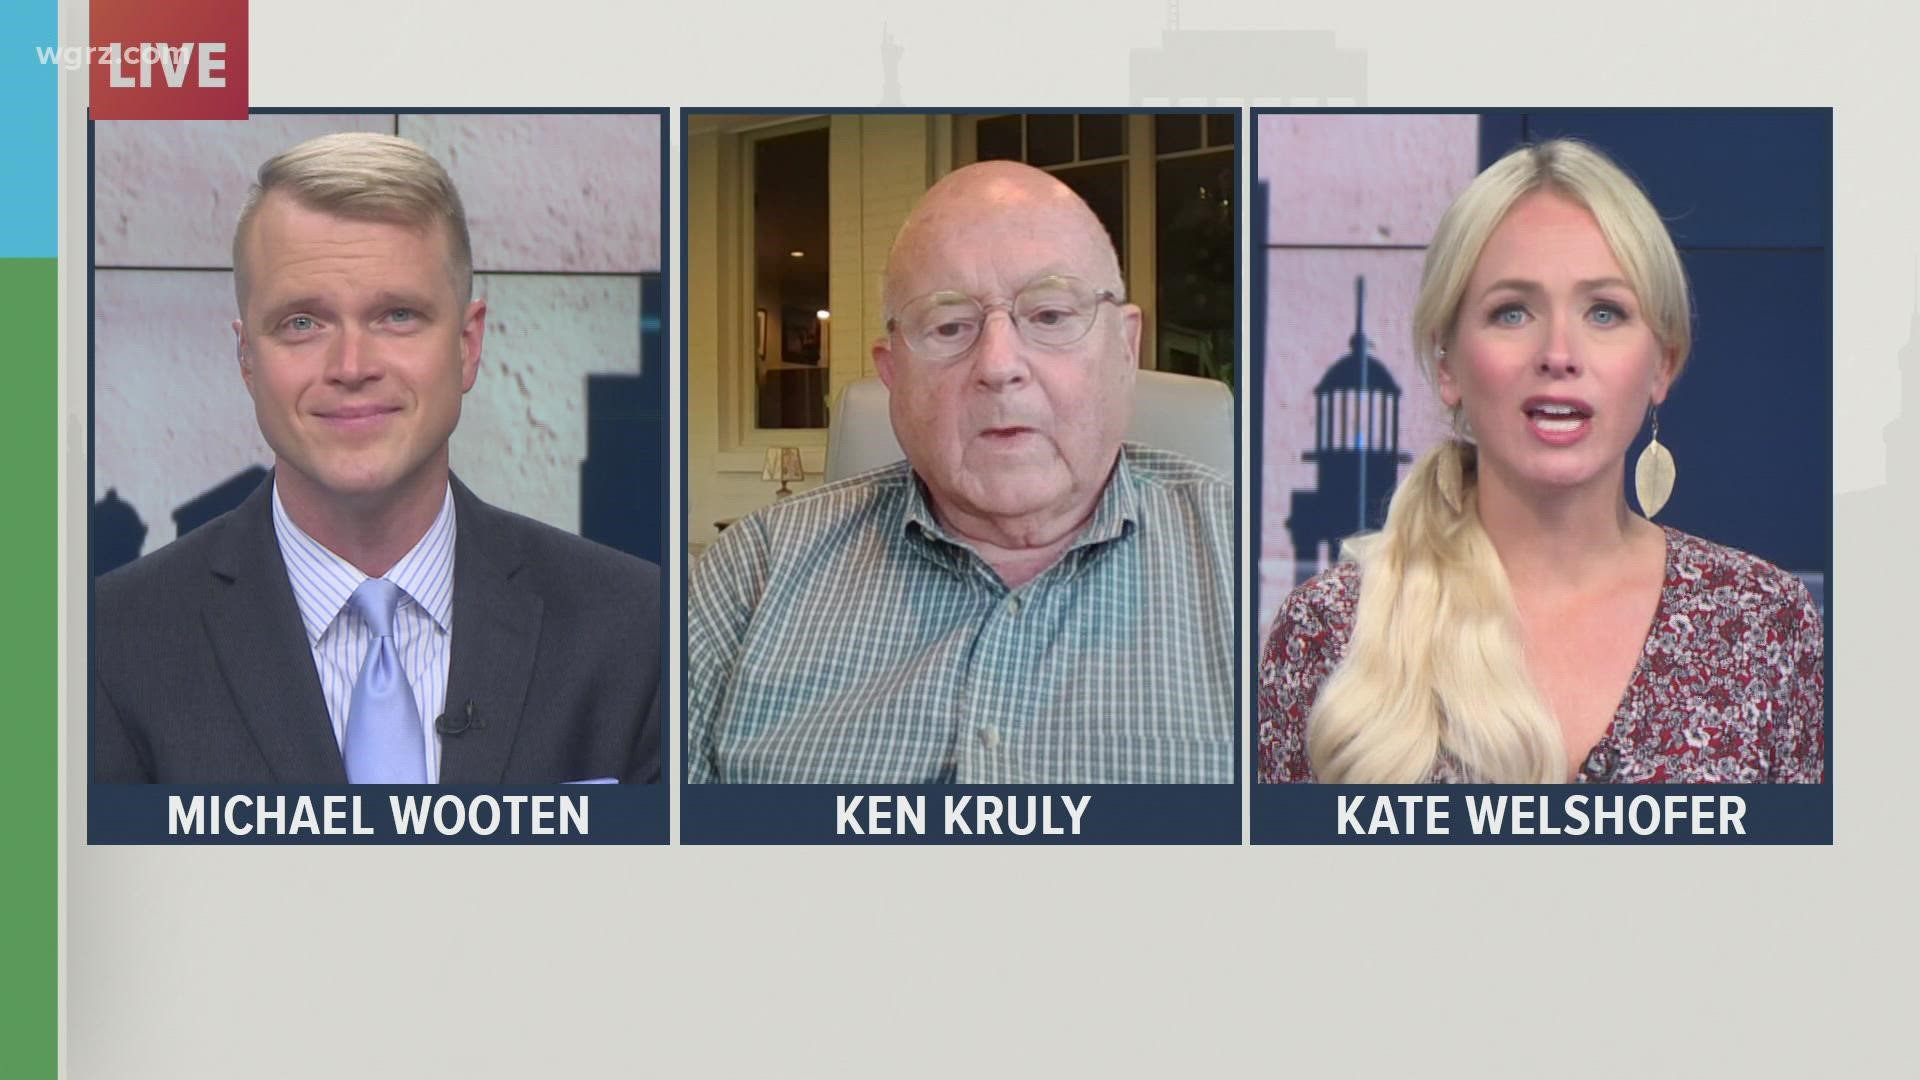 Ken Kruly, one of our 2 On Your Side political analysts joins our Town Hall to discuss the mayoral race.